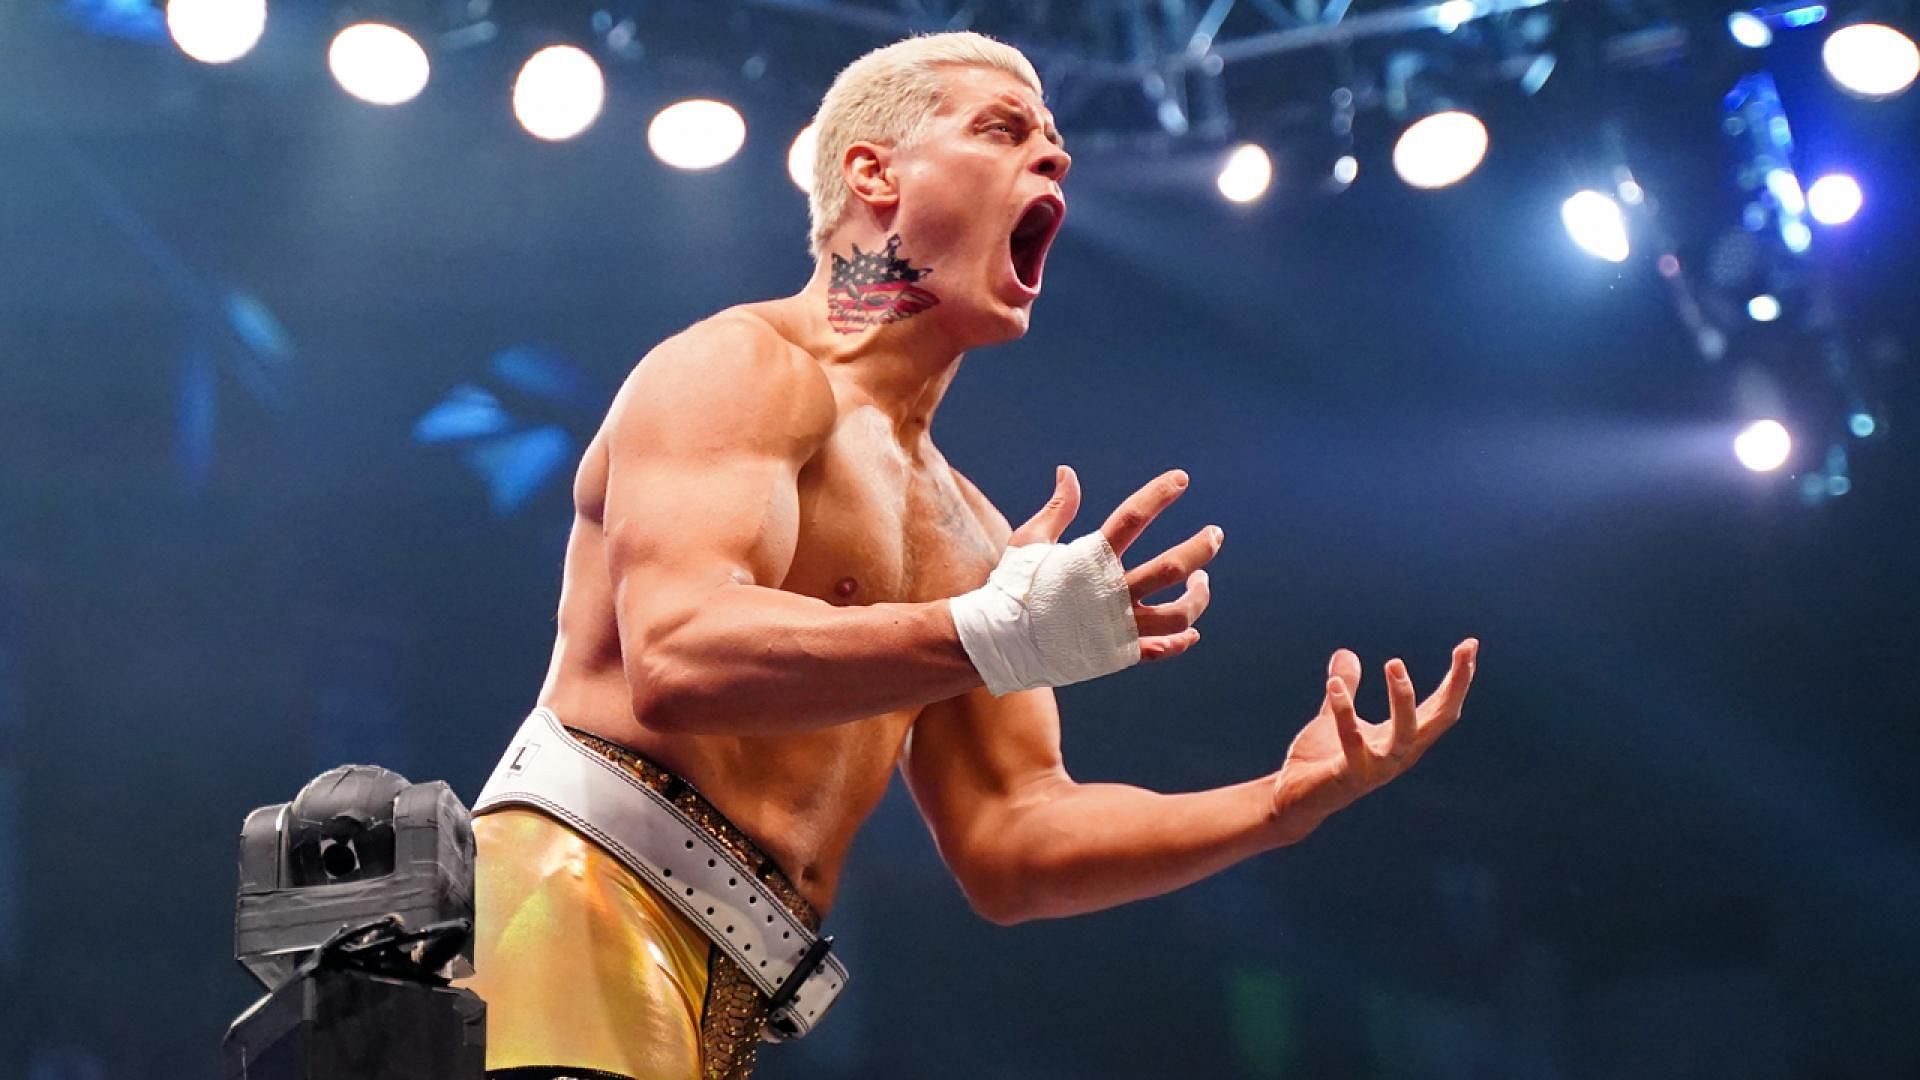 Cody Rhodes is Rumored to Return to WWE at WrestleMania 38